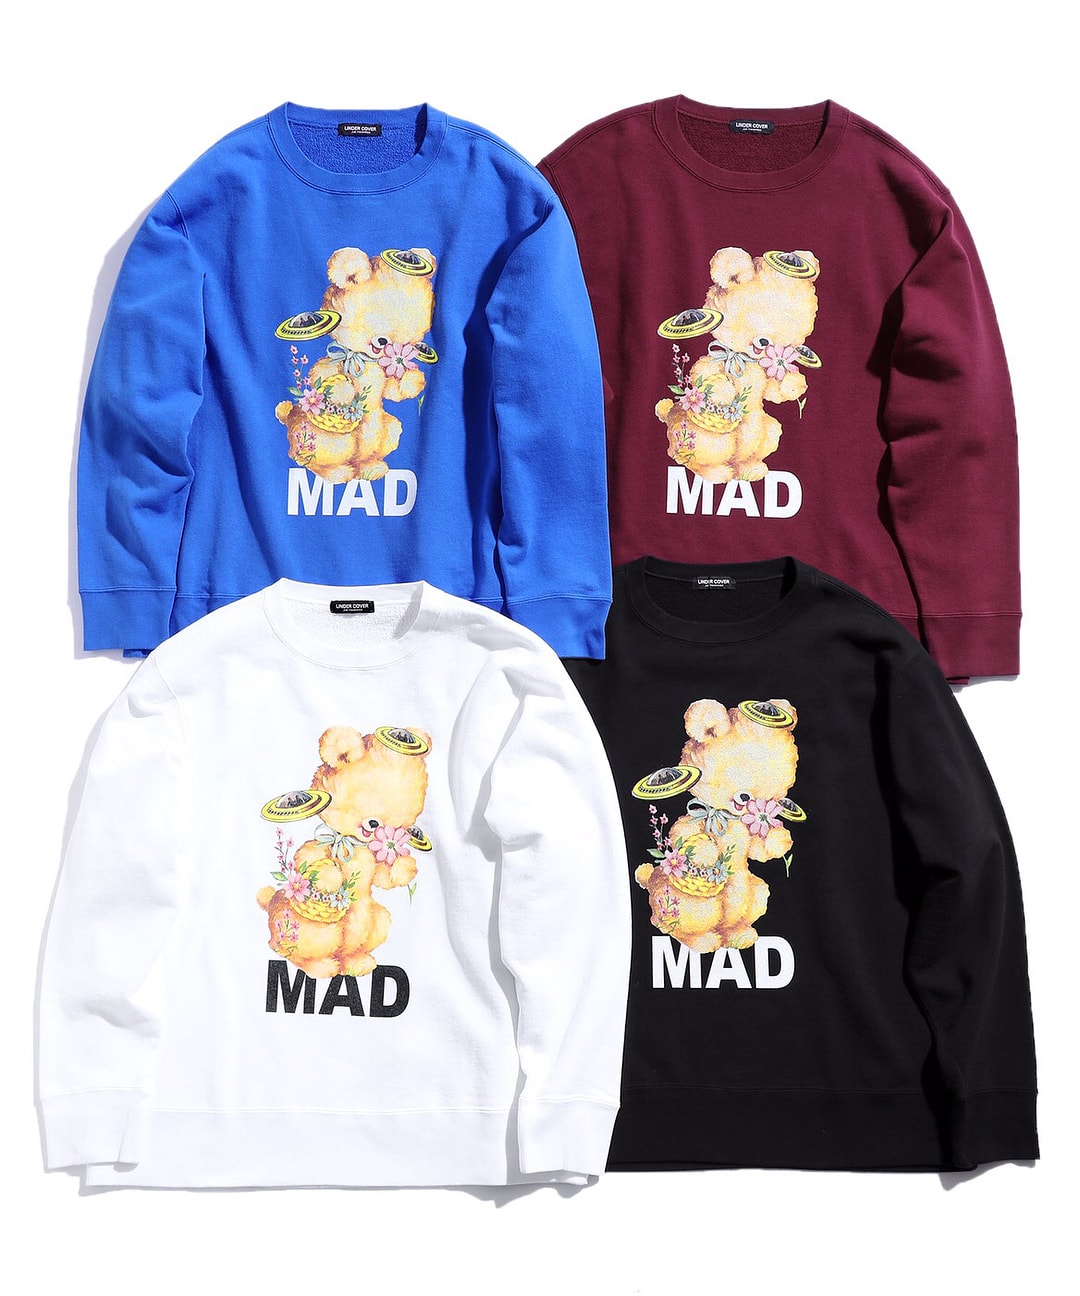 UNDERCOVER 2018 春夏 MADSTORE 獨佔系列